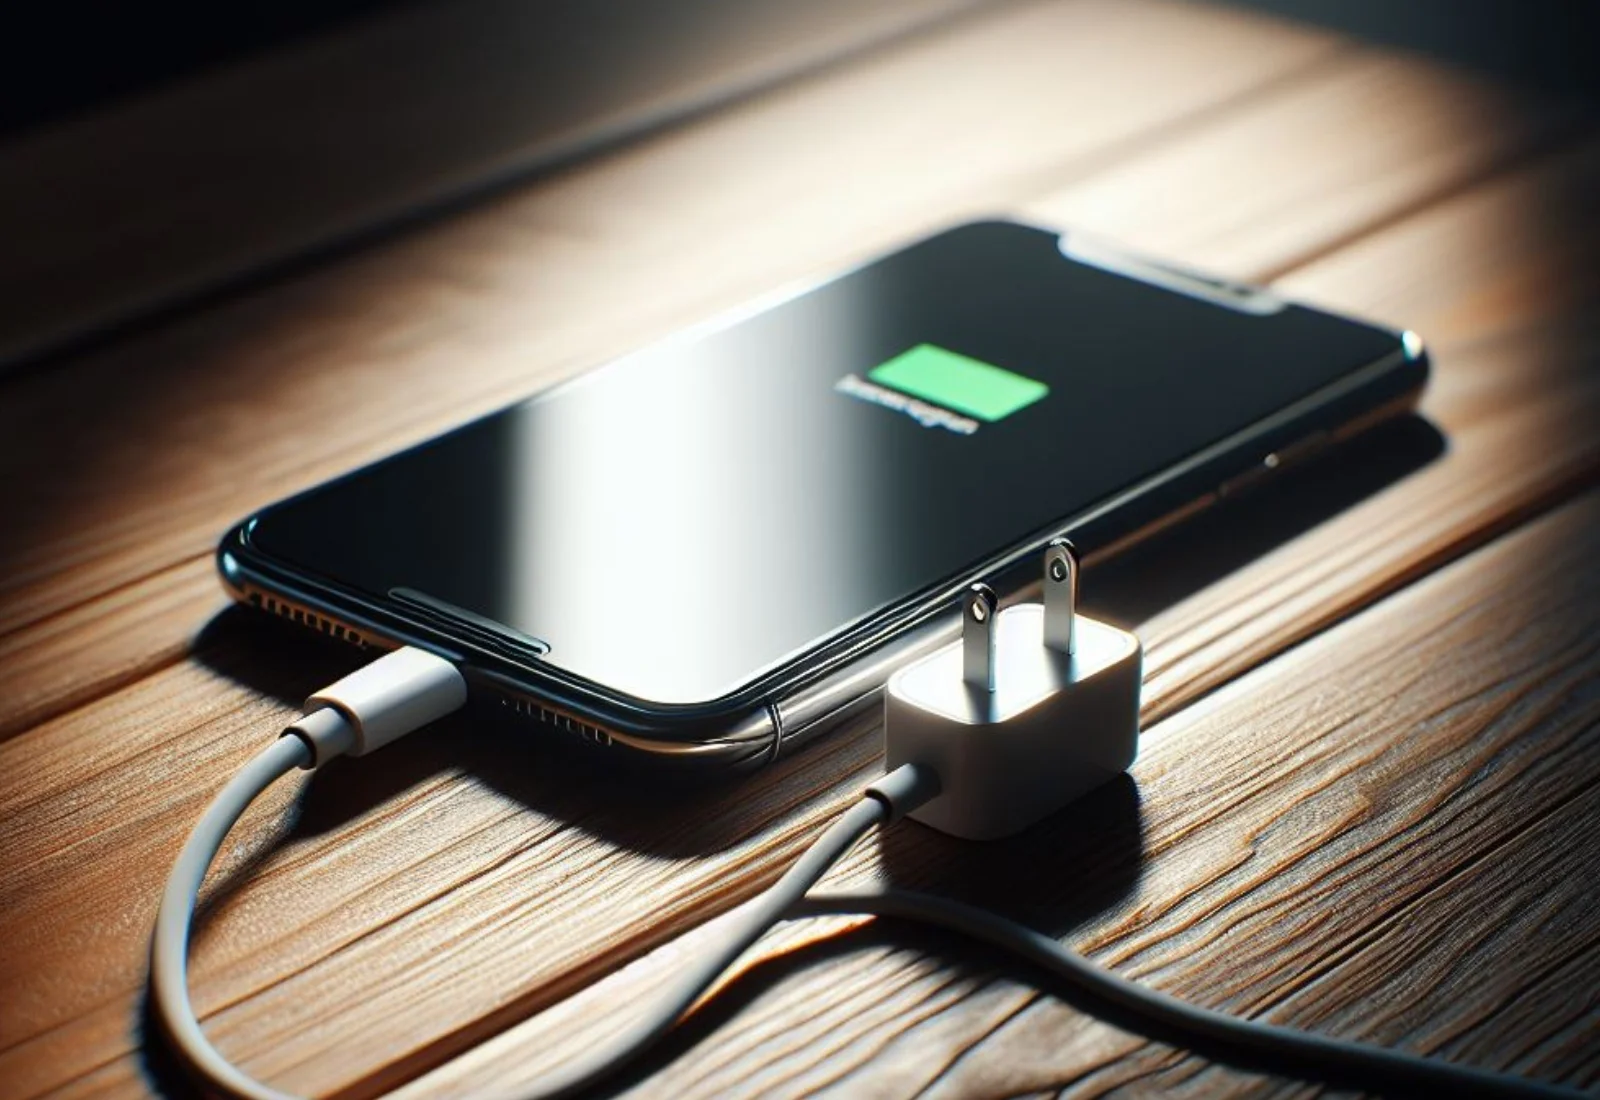 Solutions for iPhone Charging Issues and Battery Replacement